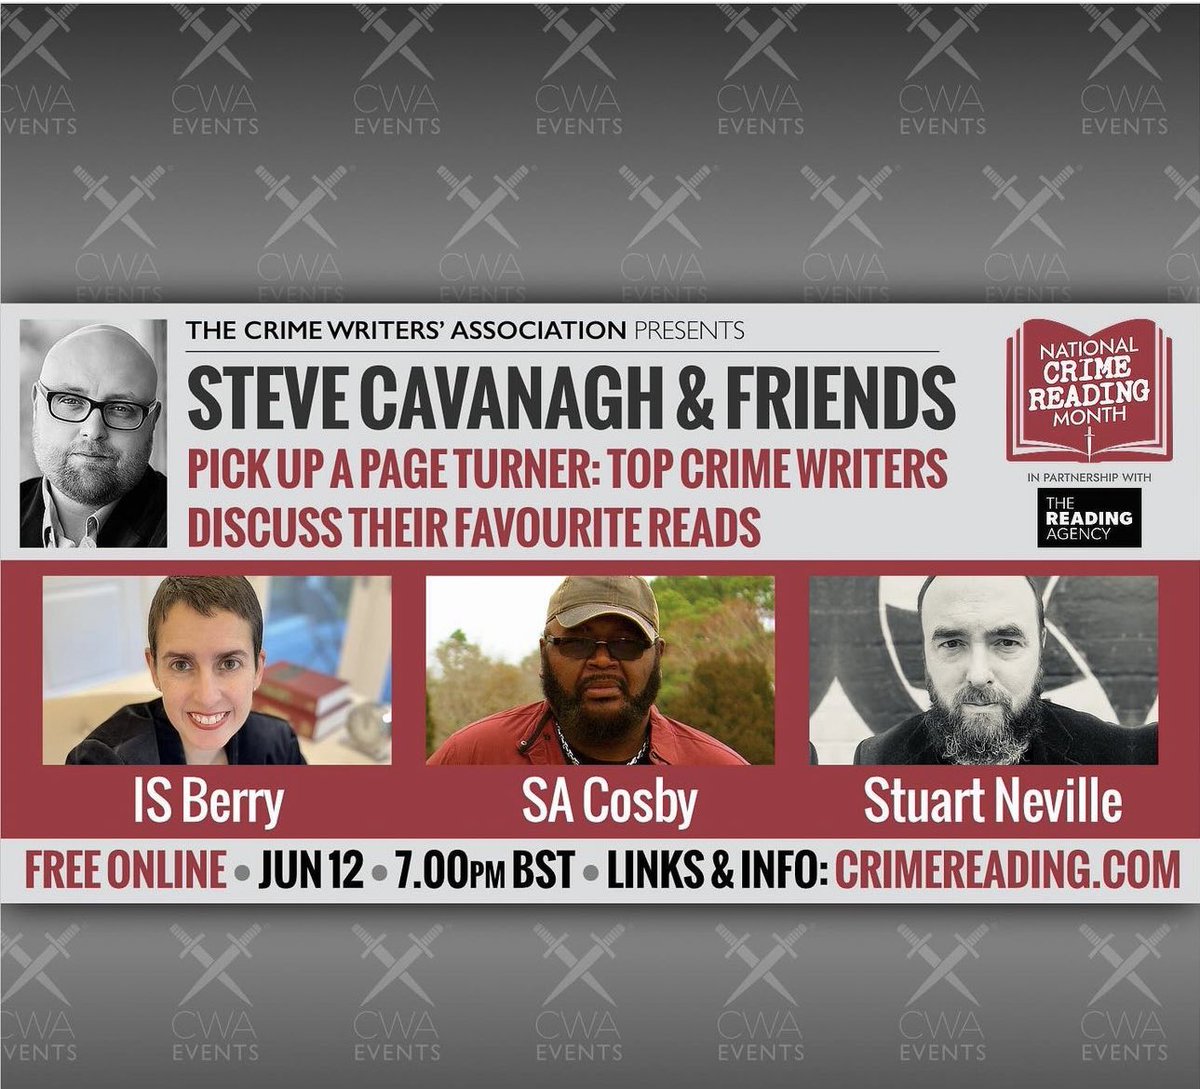 FREE ONLINE EVENT!! Join @SteveCavanagh_ @blacklionking73 @stuartneville and @isberryauthor as they reveal their favourite crime and thriller reads, and the books that inspired them, for National Crime Reading Month. eventbrite.co.uk/e/steve-cavana…